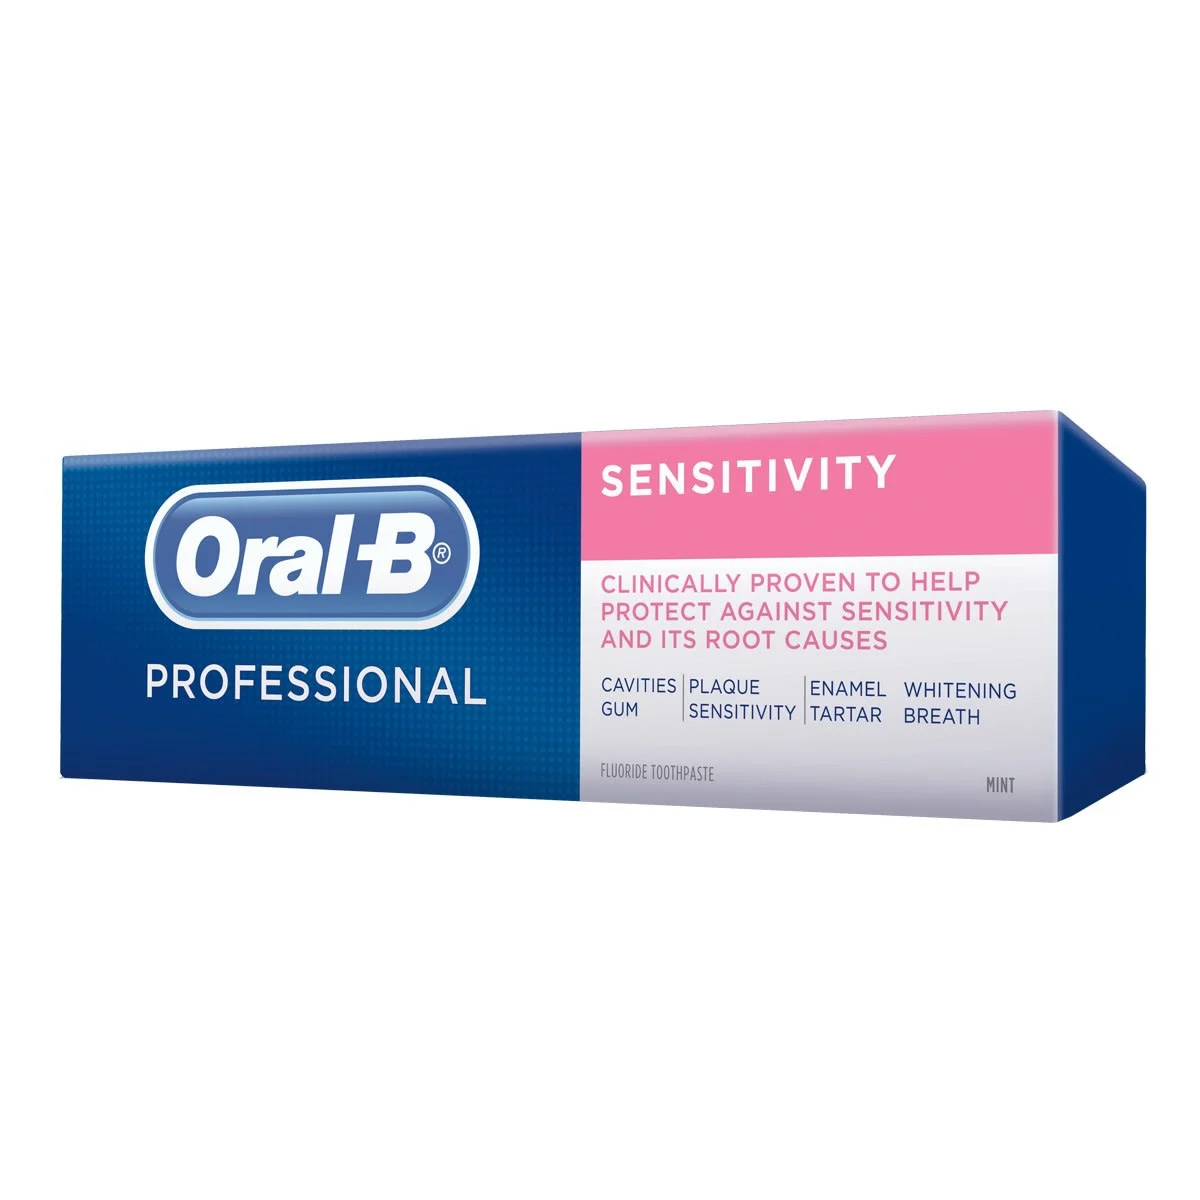 Oral-B Pro-Expert Professional Sensitive toothpaste 